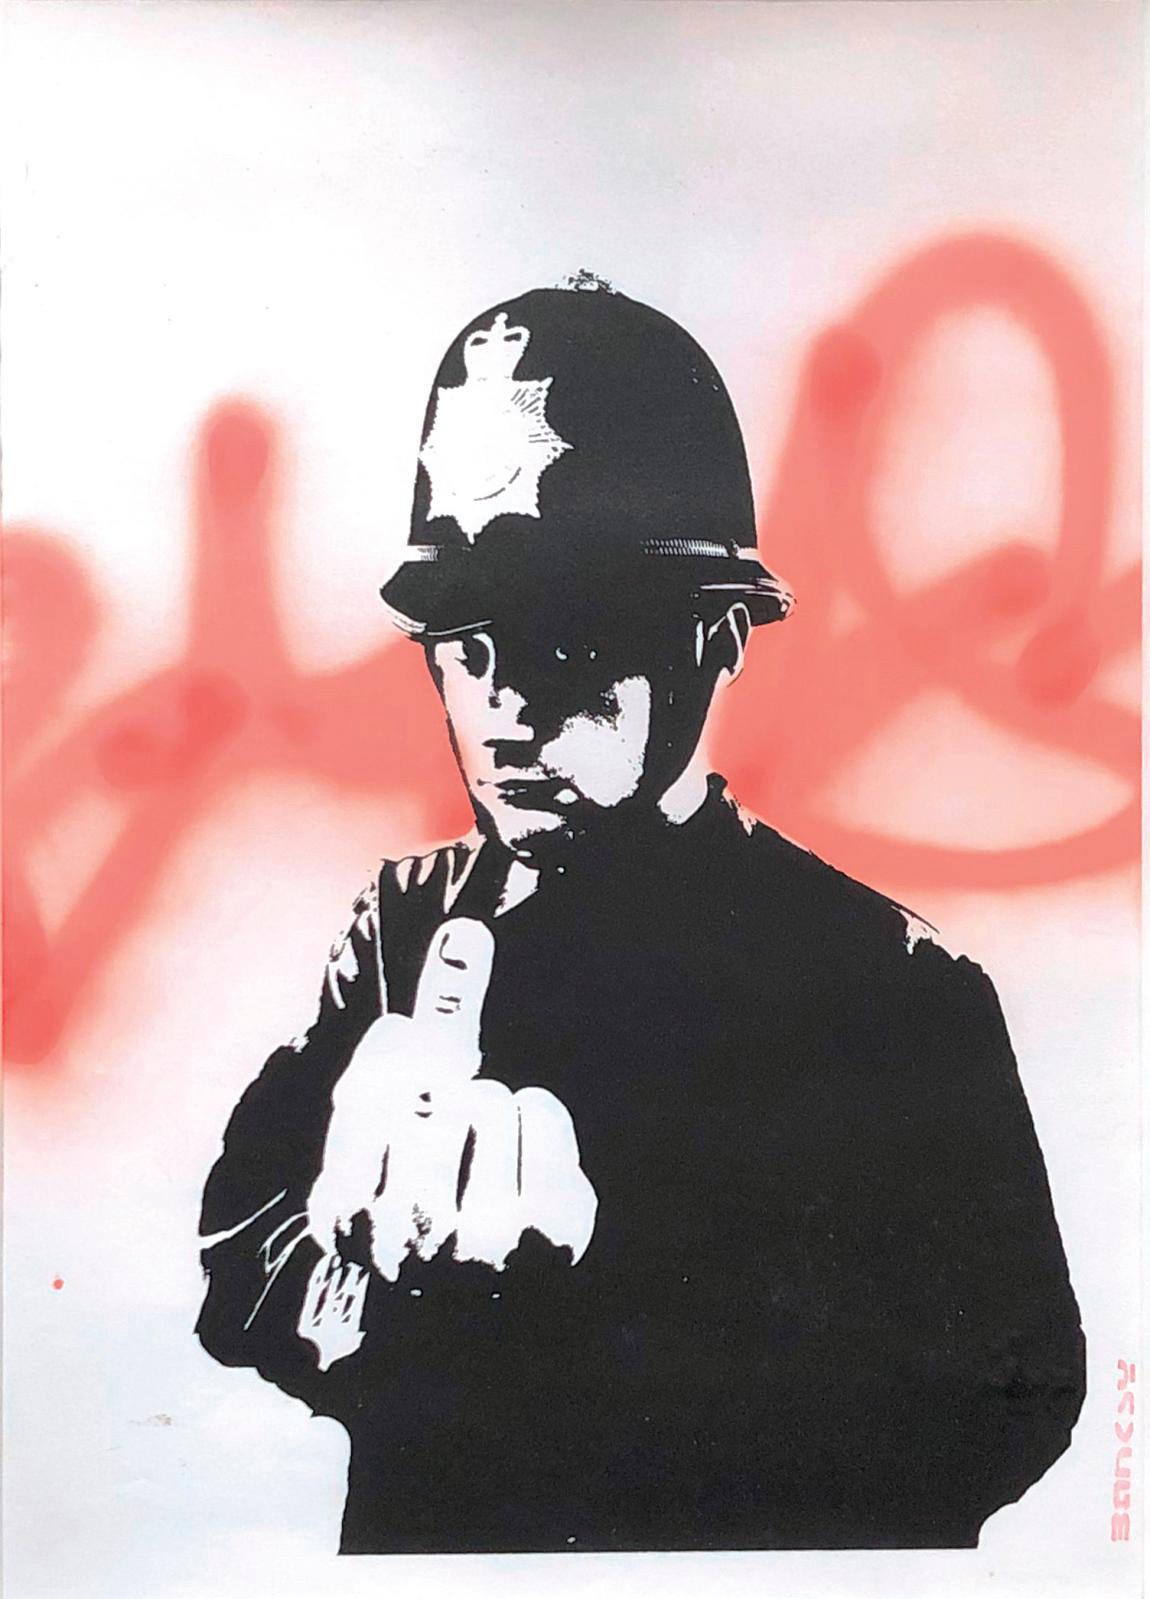 Rude Copper: A Seminal Work by Banksy